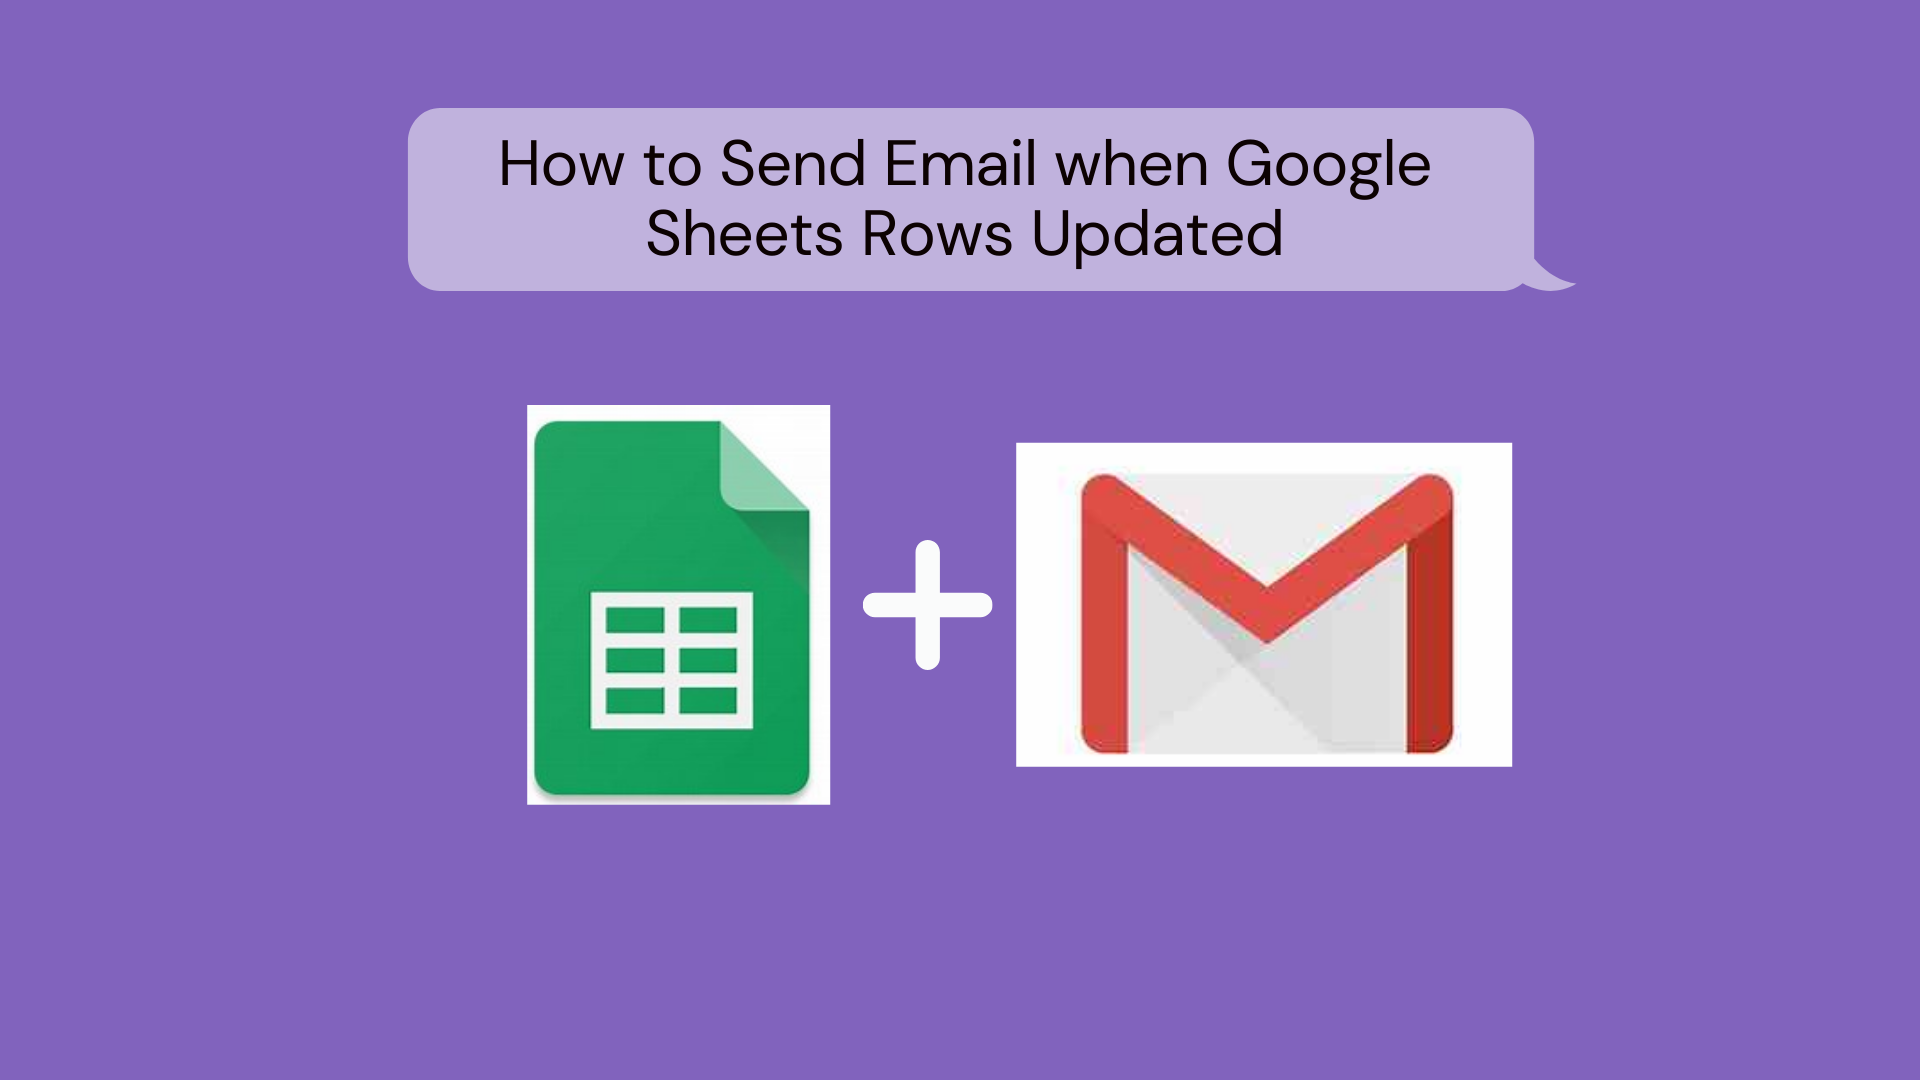 How to Send Email when Google Sheets Rows Updated